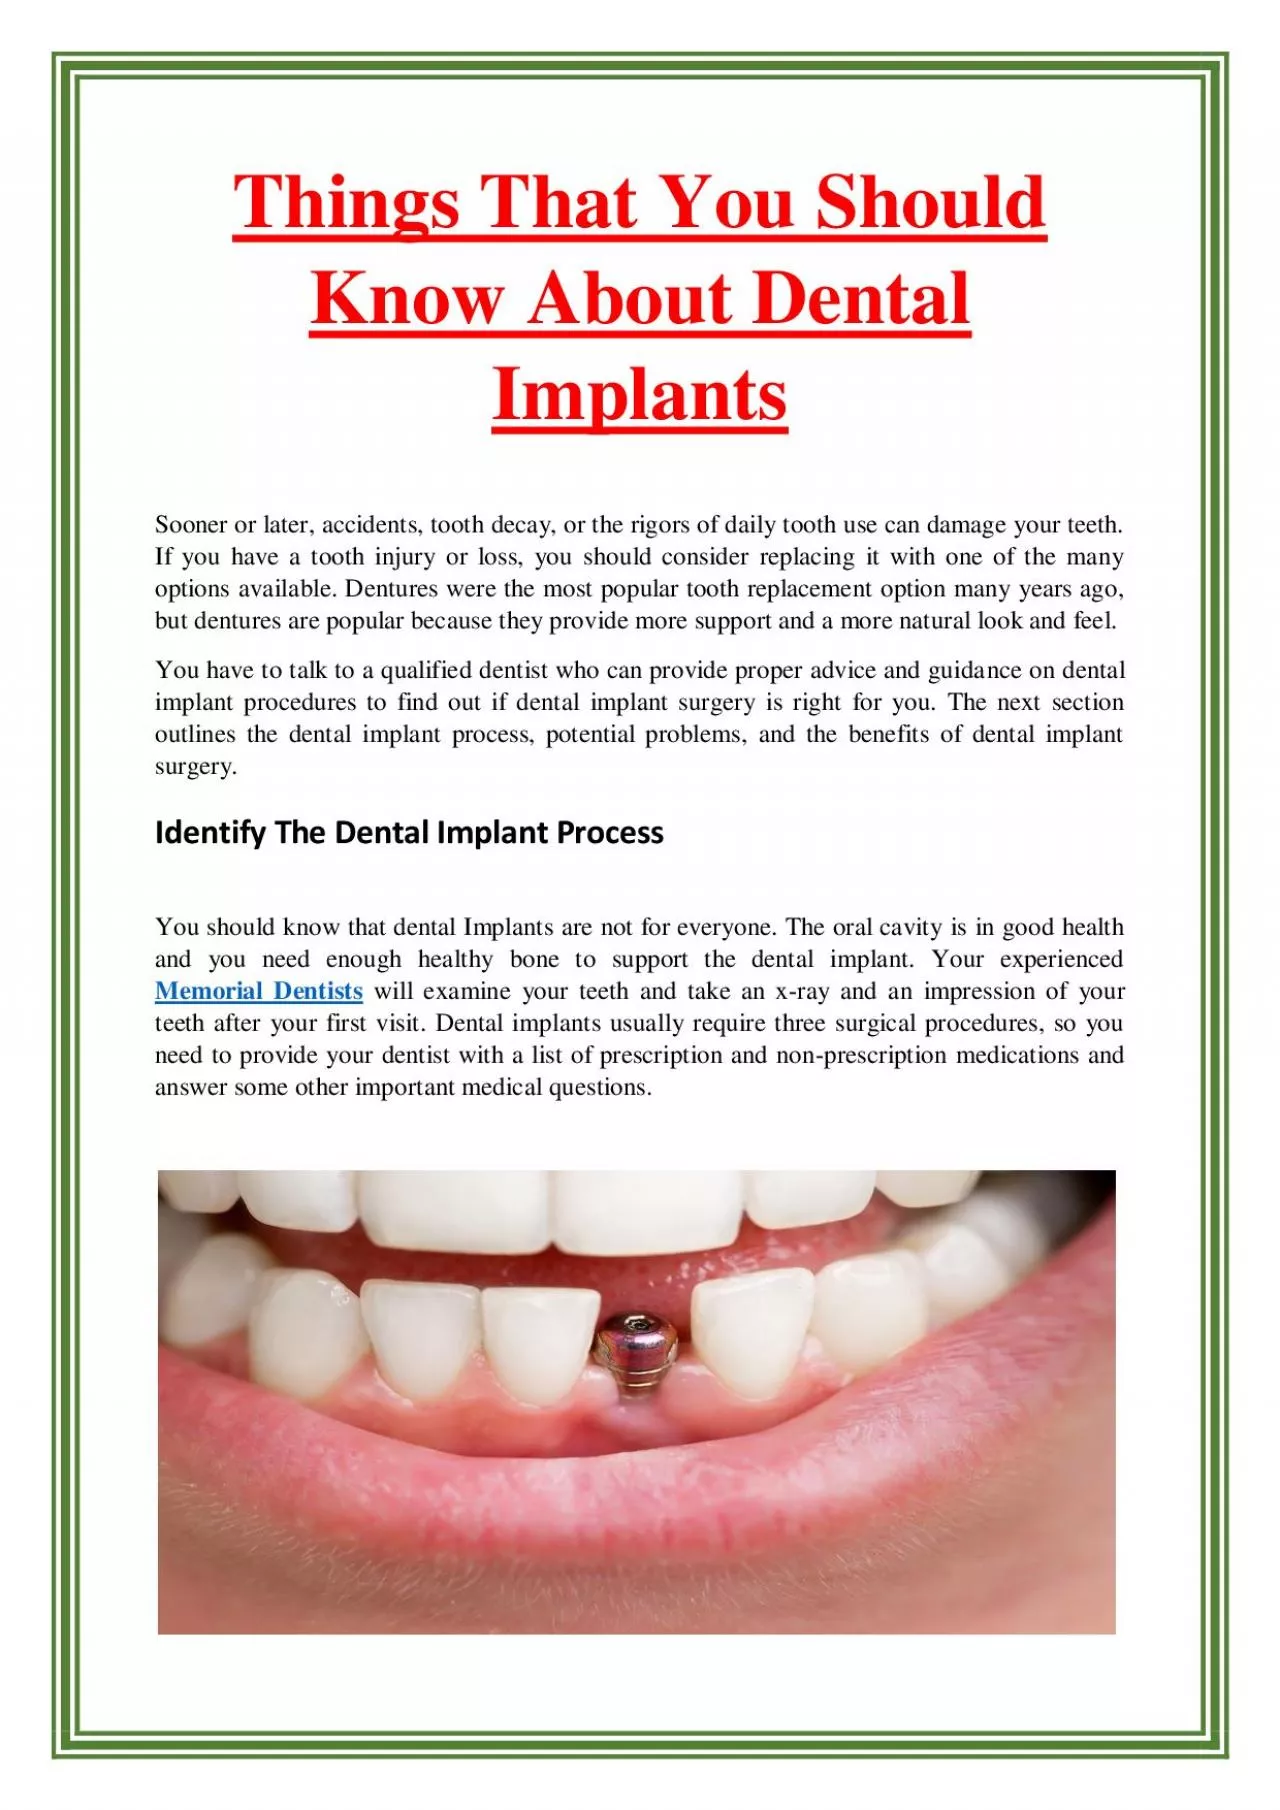 Things That You Should Know About Dental Implants